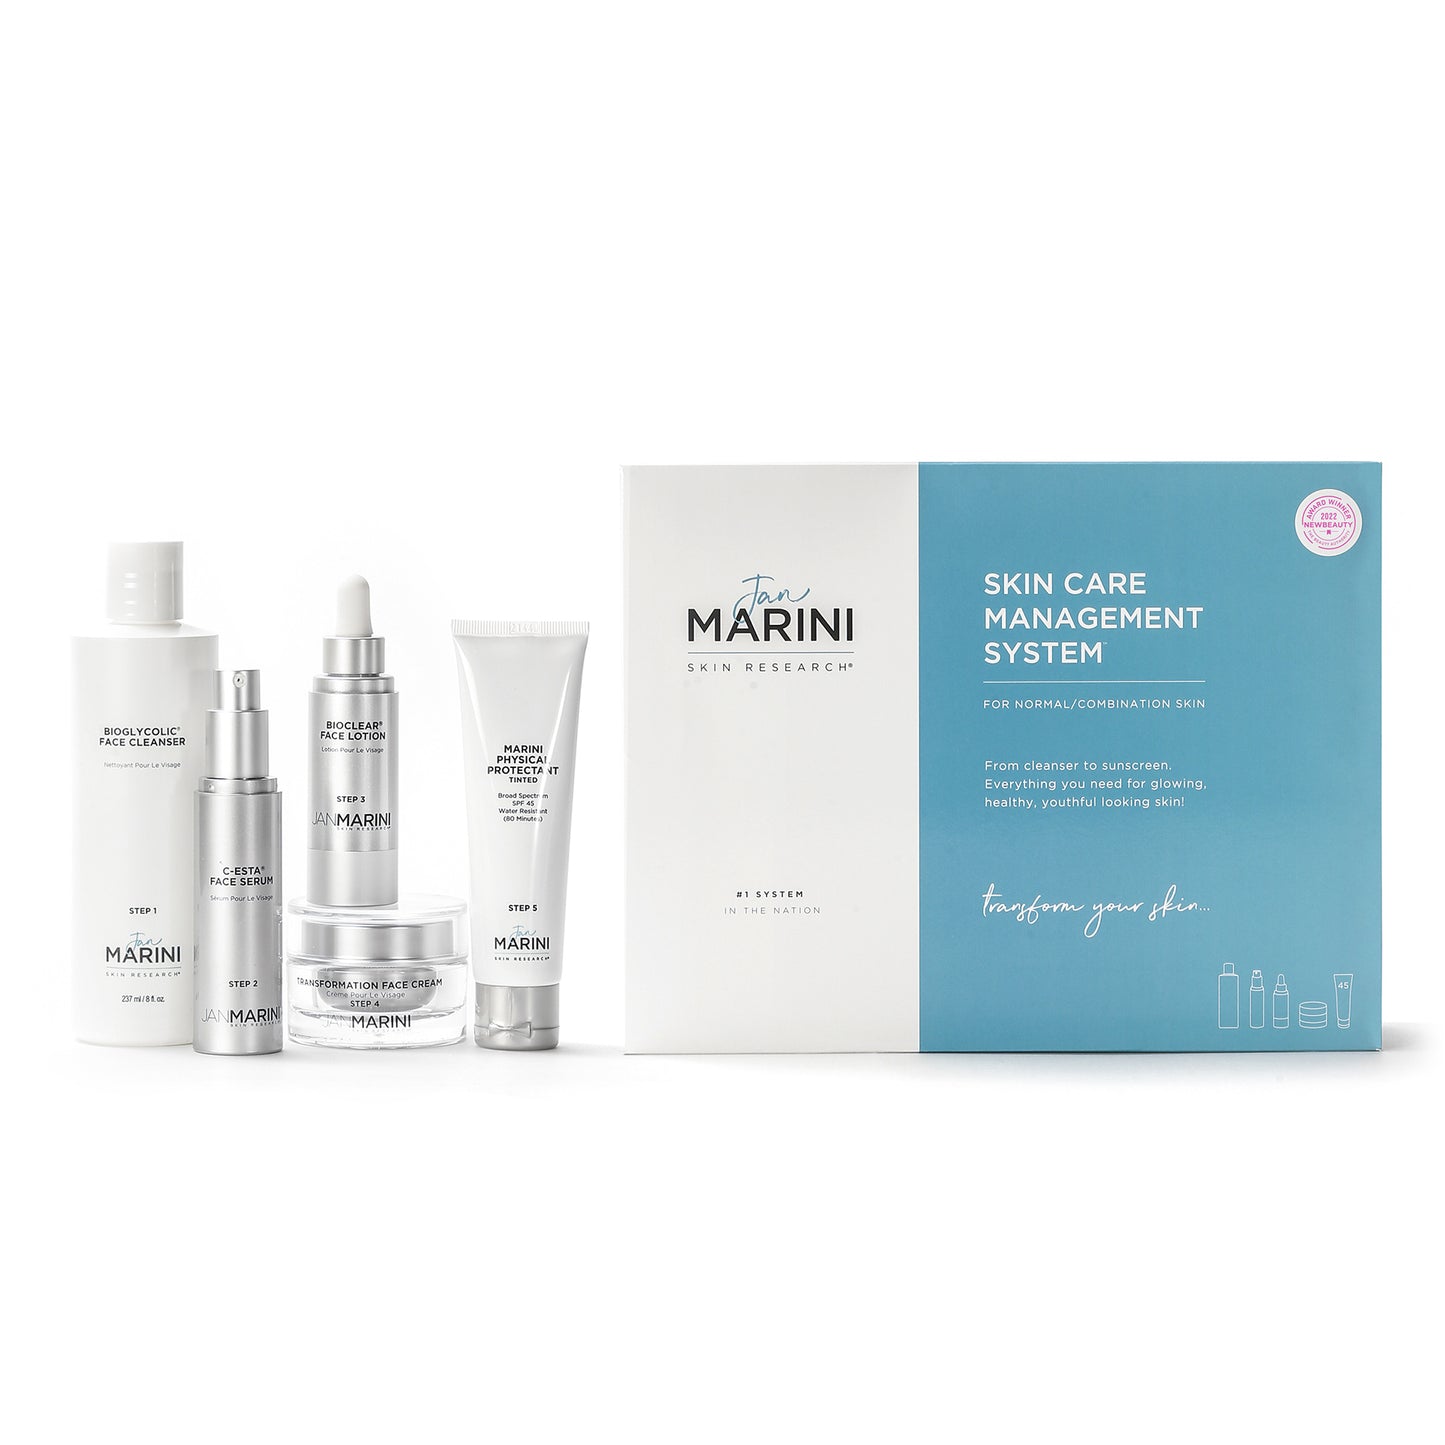 Jan Marini A Skin Care Management System - Normal Combo w/ MPP SPF45 Tinted